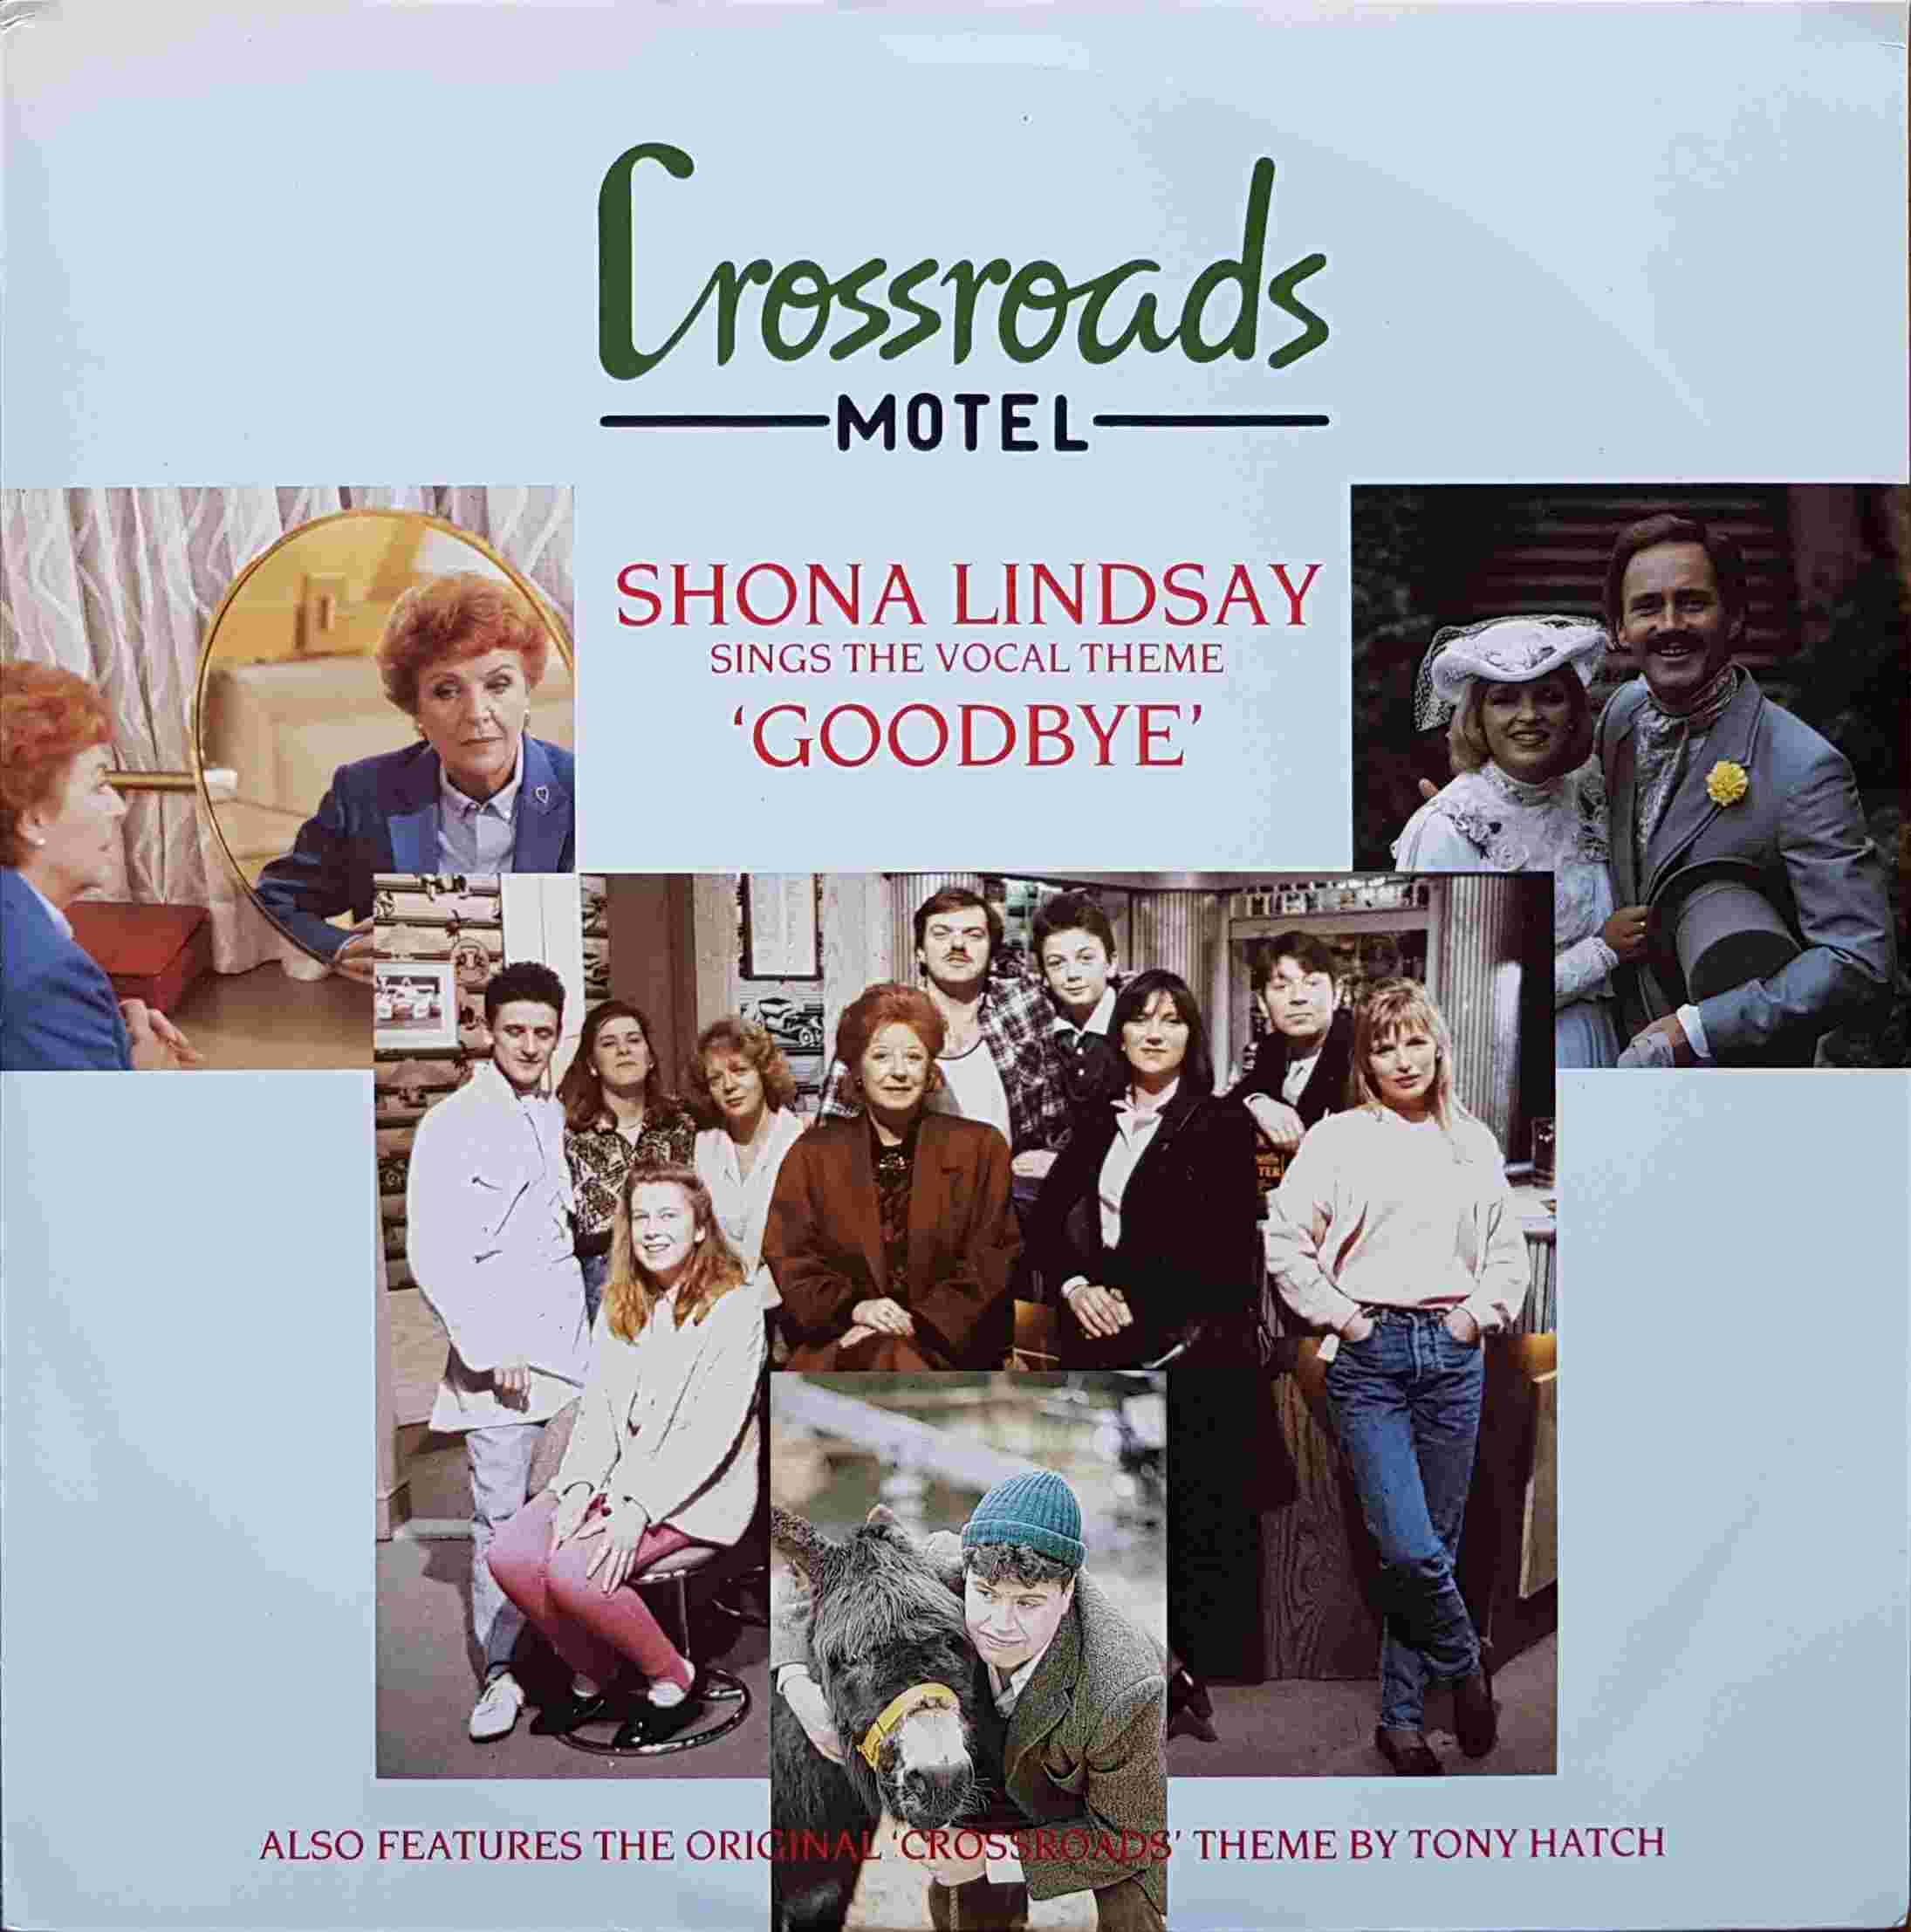 Picture of 609 912 Crossroads by artist Tony Hatch / Early / Litman from ITV, Channel 4 and Channel 5 12inches library